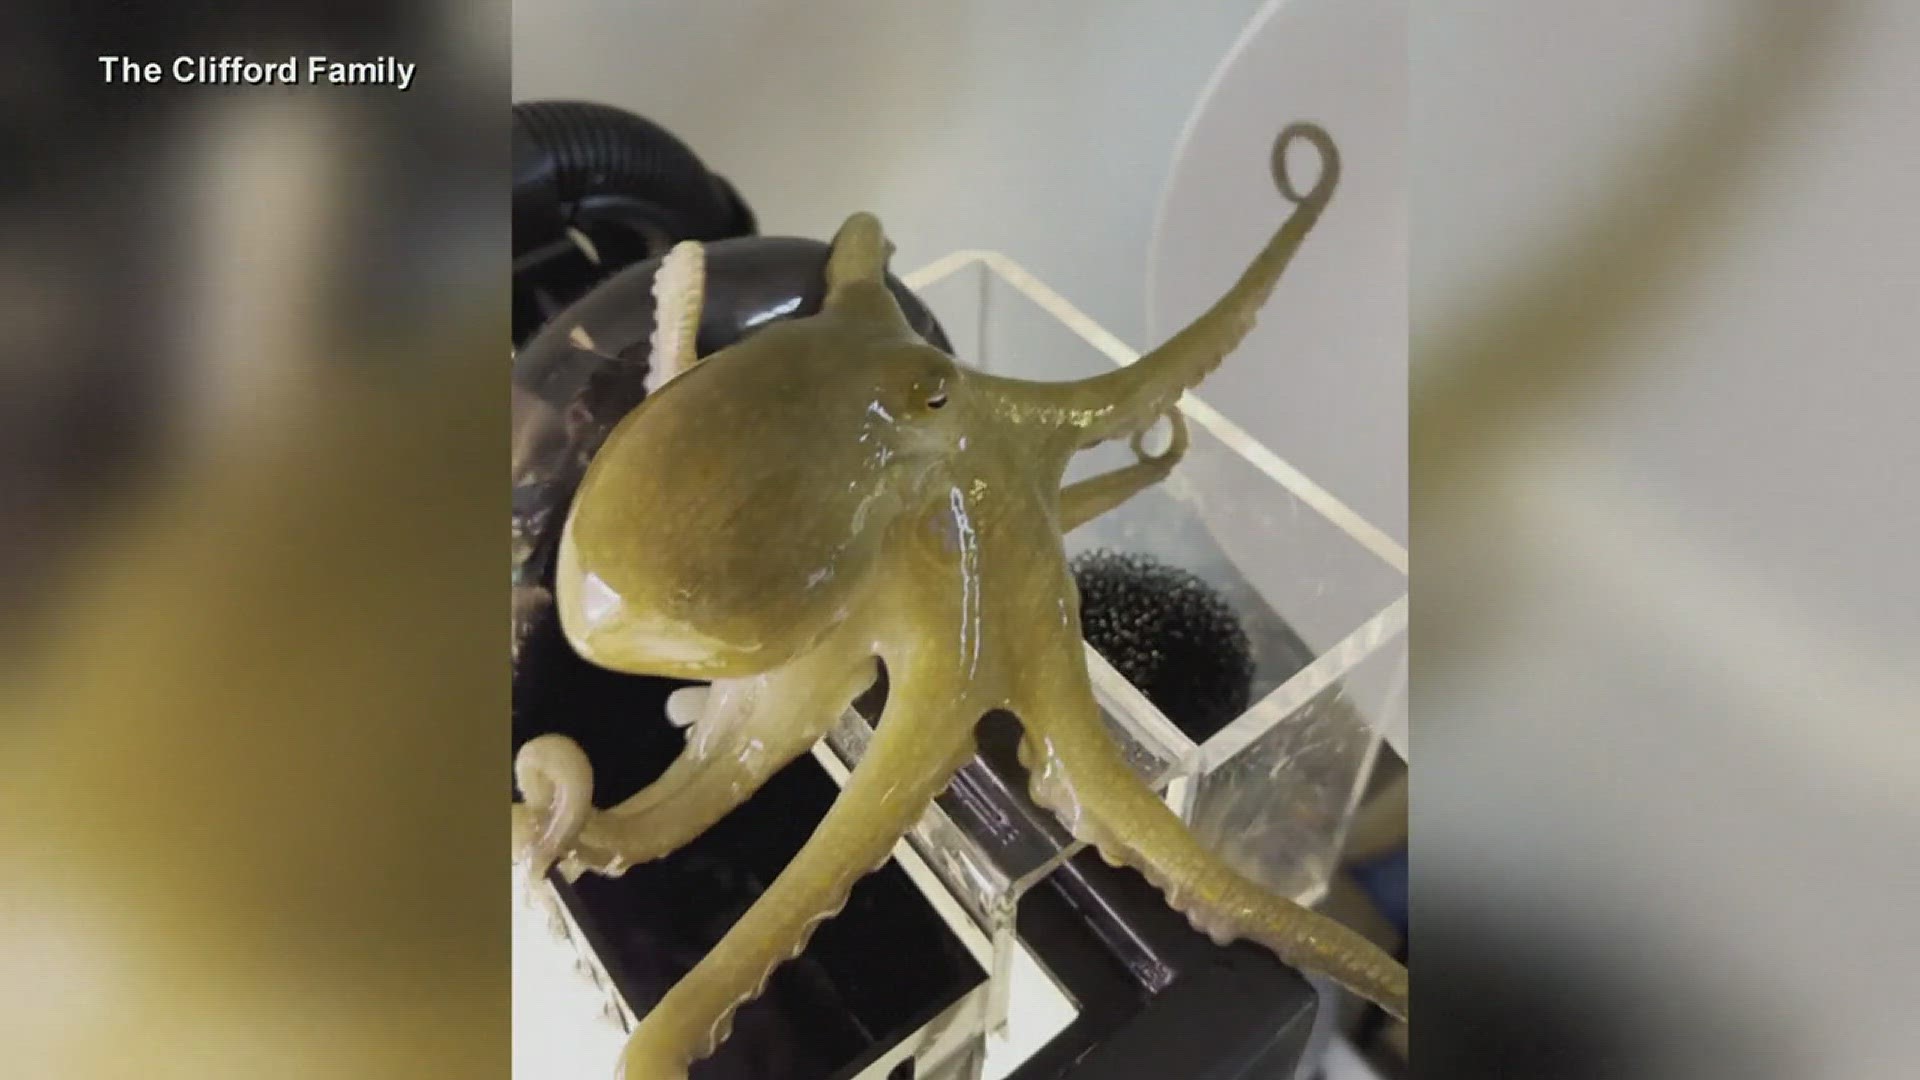 What started as a unique family pet grew into an octopus family. The parents were able to scoop up the young octopi and give them popular names like "Jay-Sea."